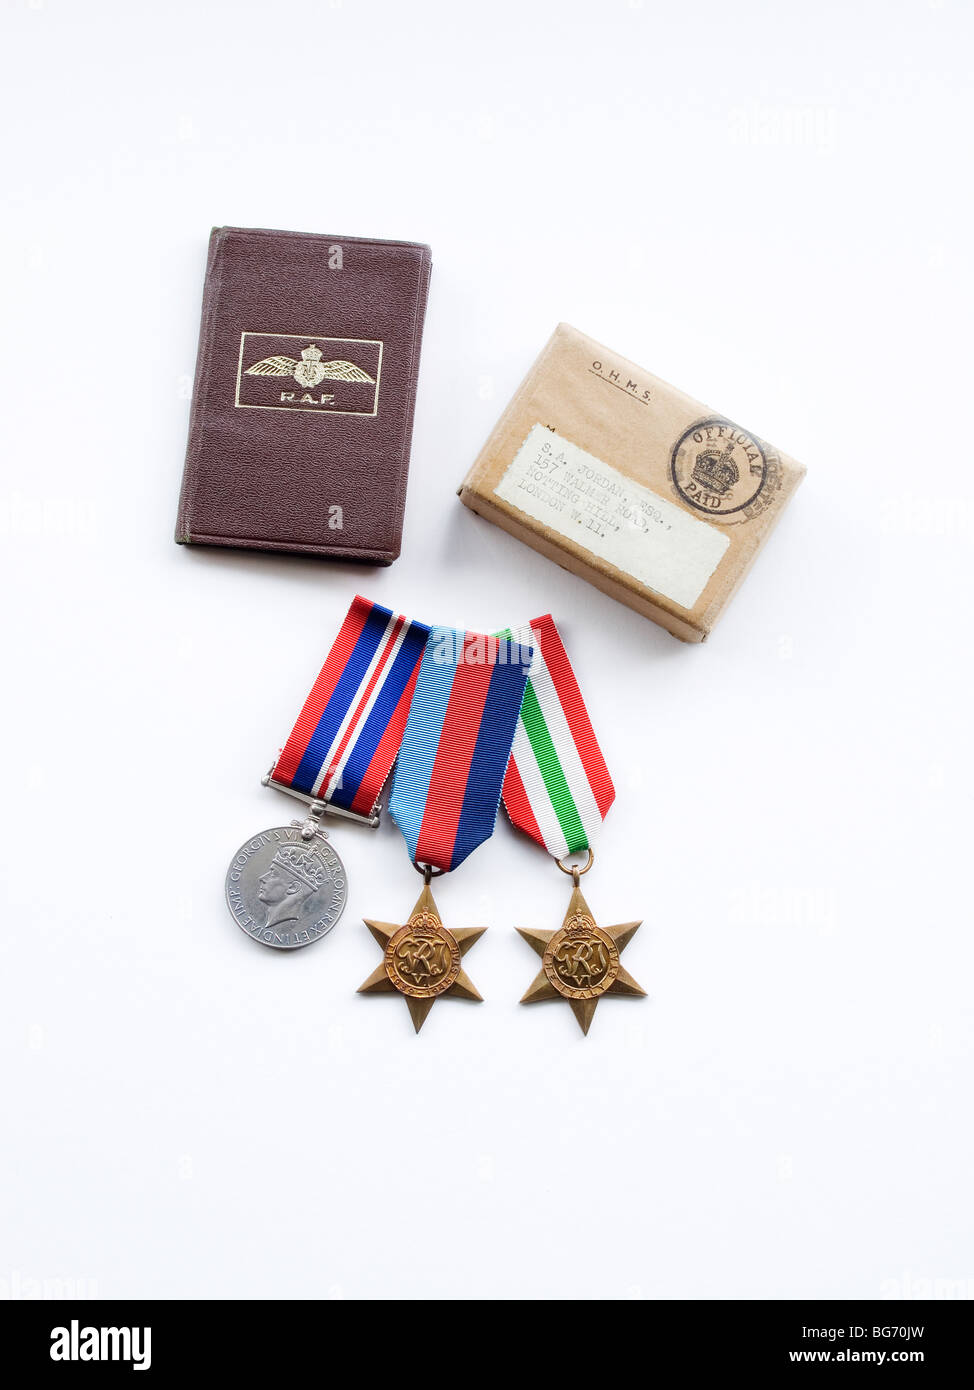 World War 2 Medals awarded to British and Commonwealth Troops with the original box and an RAF notebook on a white background Stock Photo